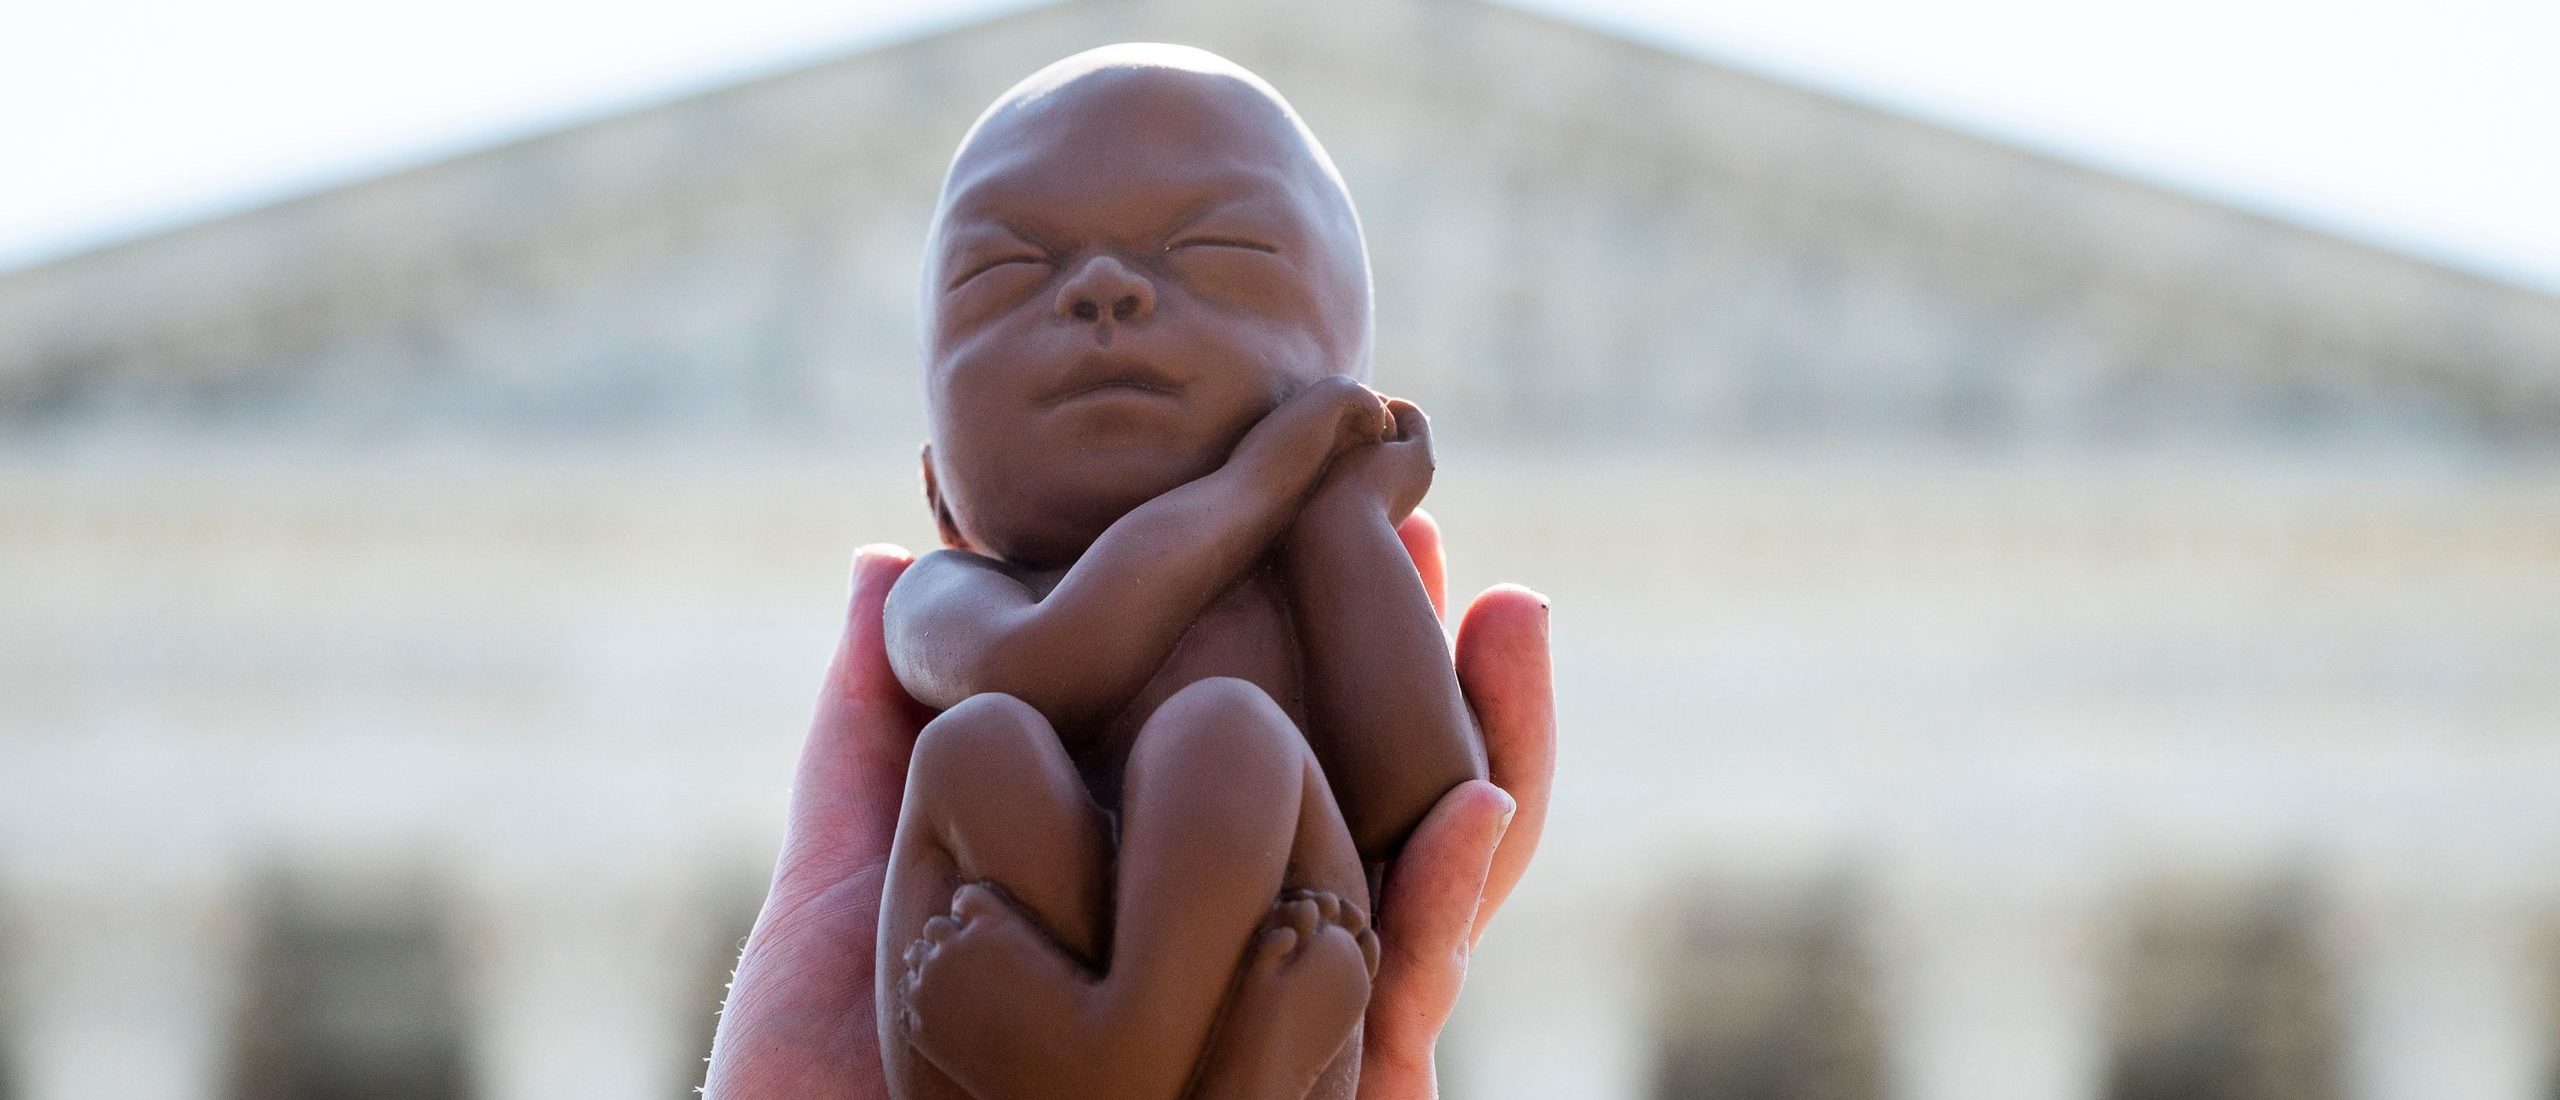 Supreme Court Refuses To Take Up Rhode Island Fetal Personhood Case The Daily Caller 9827